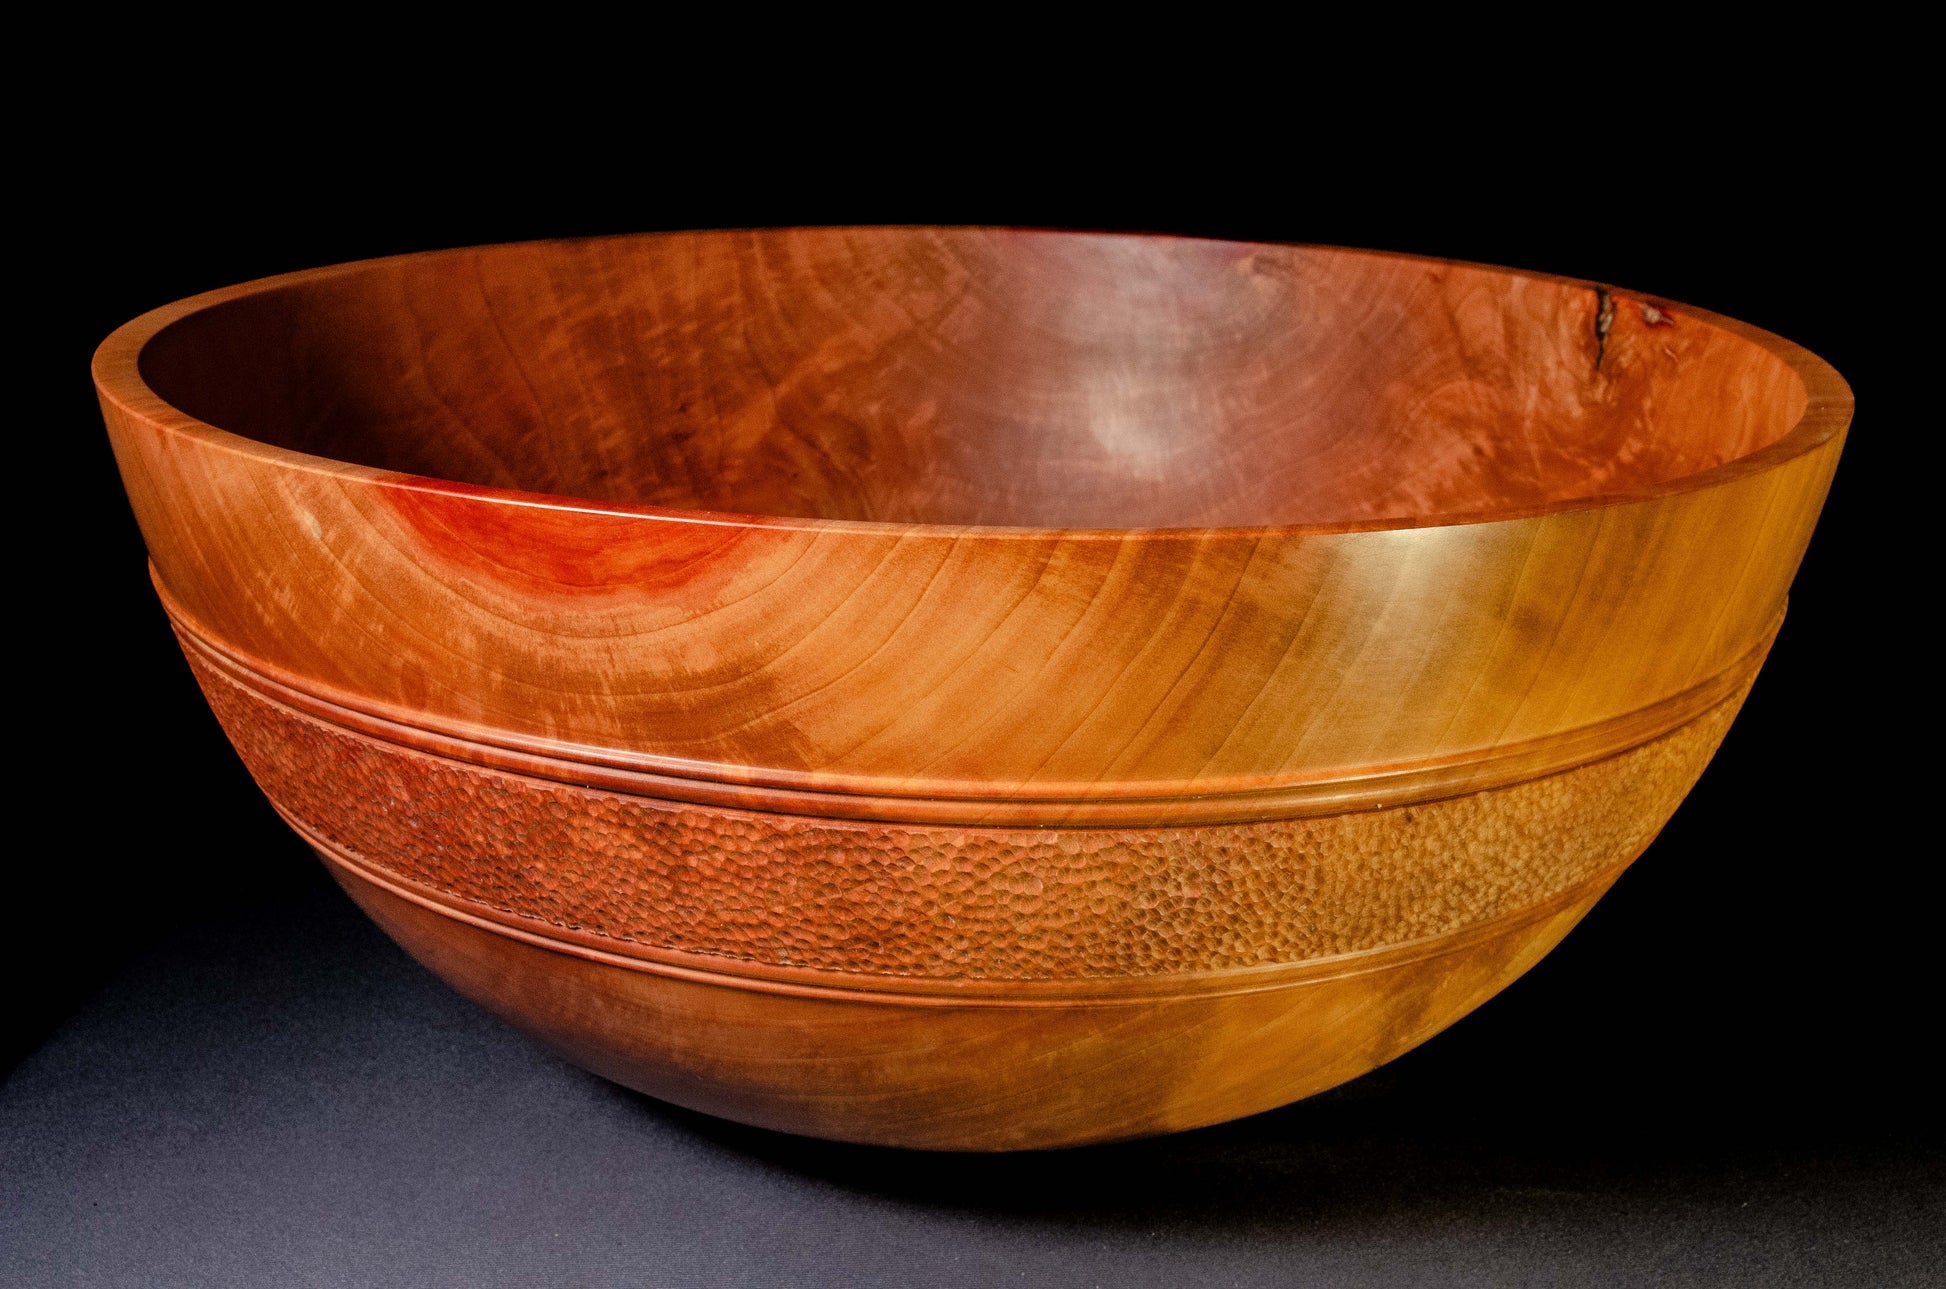 Large bowl of Pear wood with wwell-defined grain patterns. A belt of hand textured stippling encircles the bowl exterior, providing a strong visual balance and focal point. This is an heirloom bowl intended as a special gift.